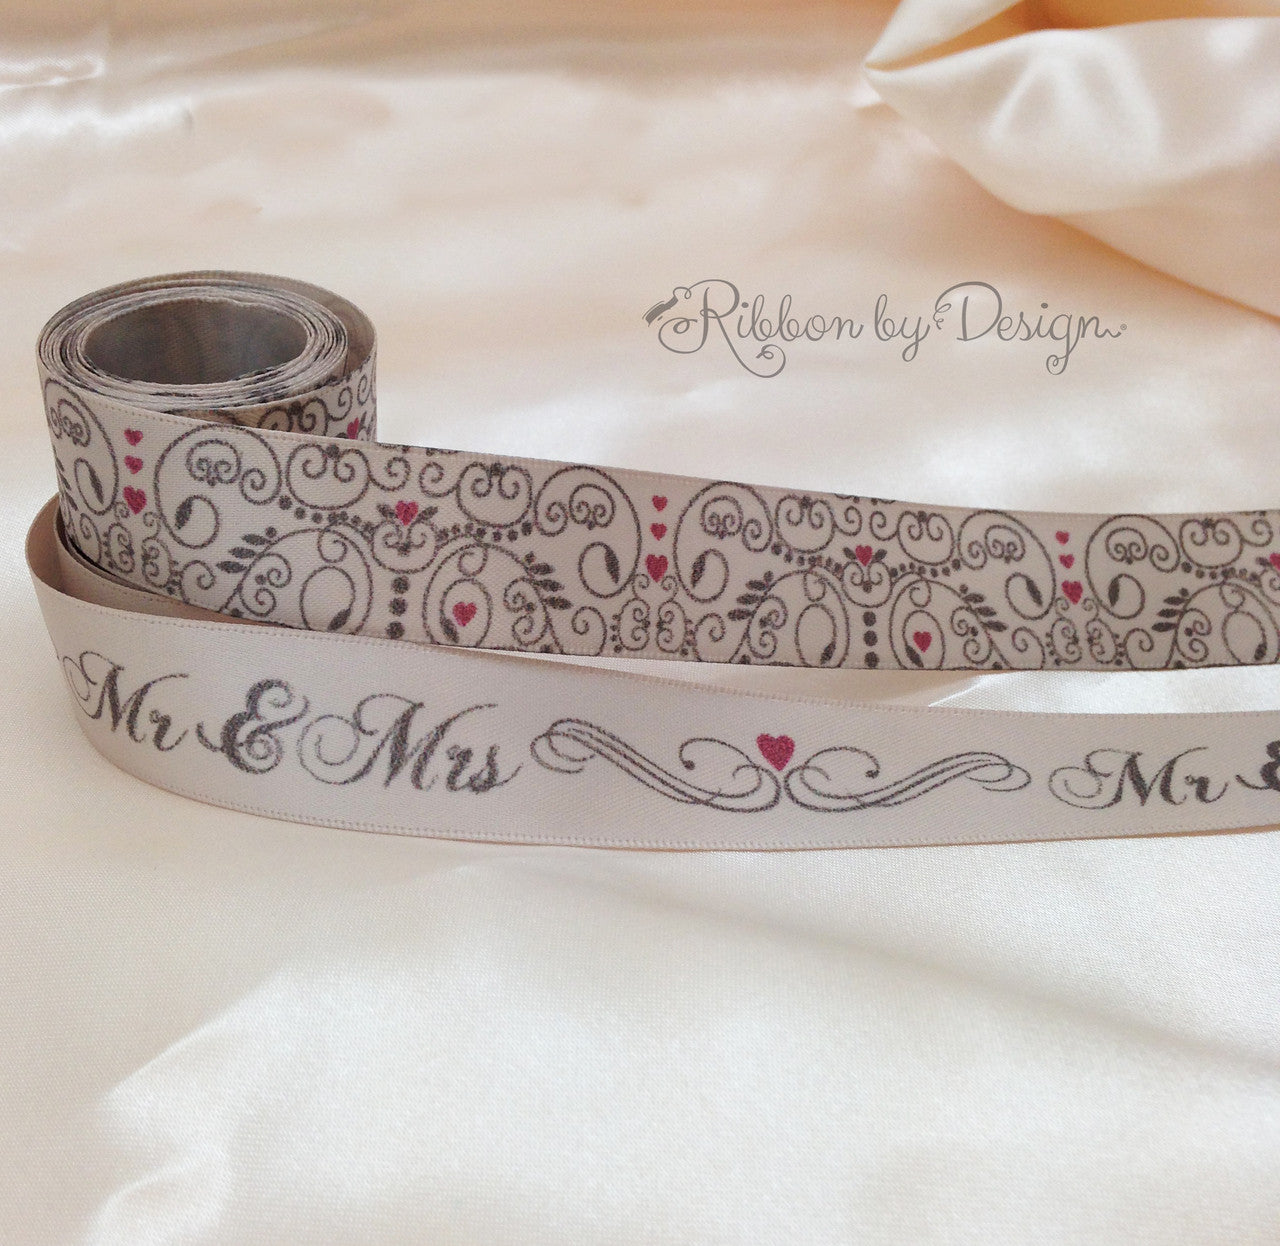 Mr & Mrs Ribbon with scrolls and hearts on 7/8" Iced Coffee Double Face Satin